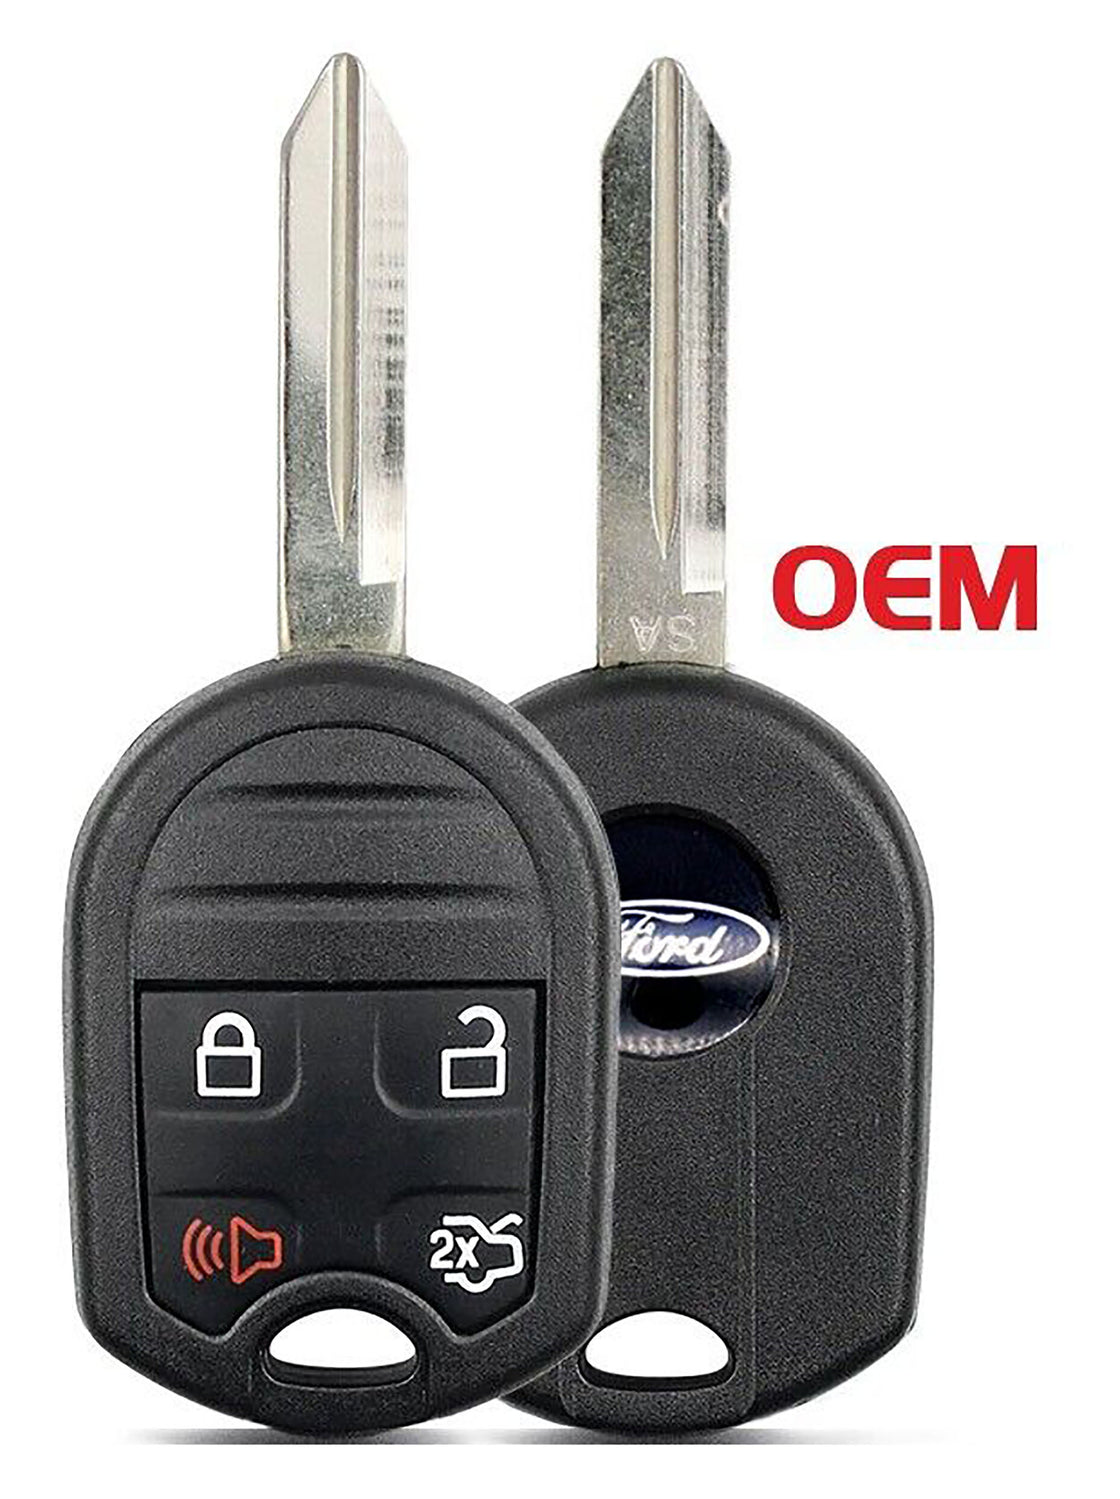 1x New OEM Factory Keyless Entry Remote Key Fob Compatible with & Fit For Ford Mazda Lincoln Mercury - MPN CWTWB1U793-OEM-02